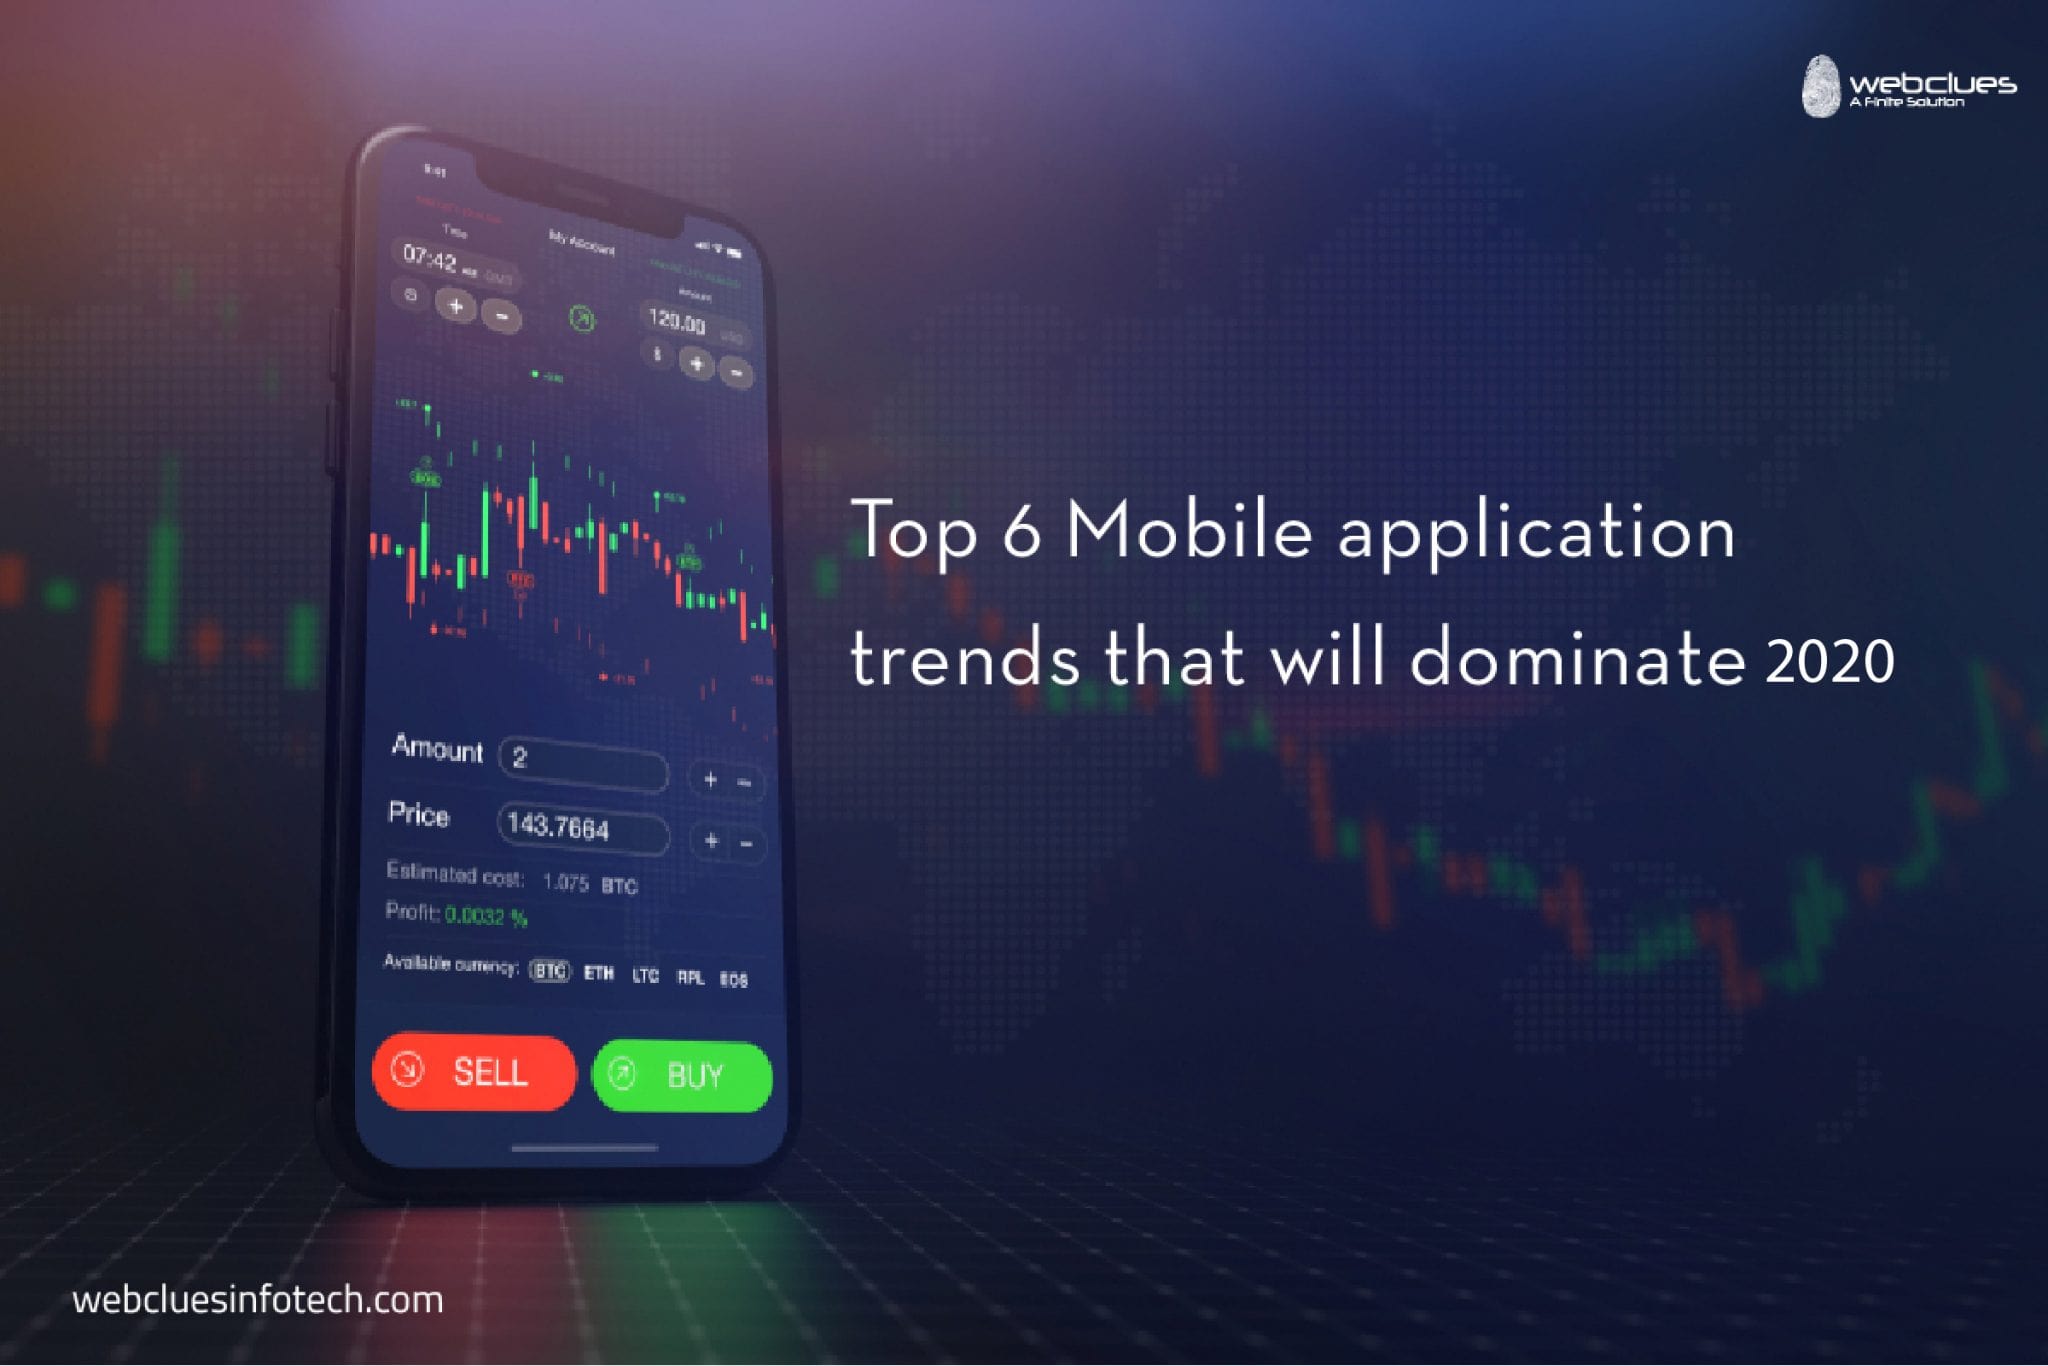 Top 6 Mobile application trends that will dominate 2020